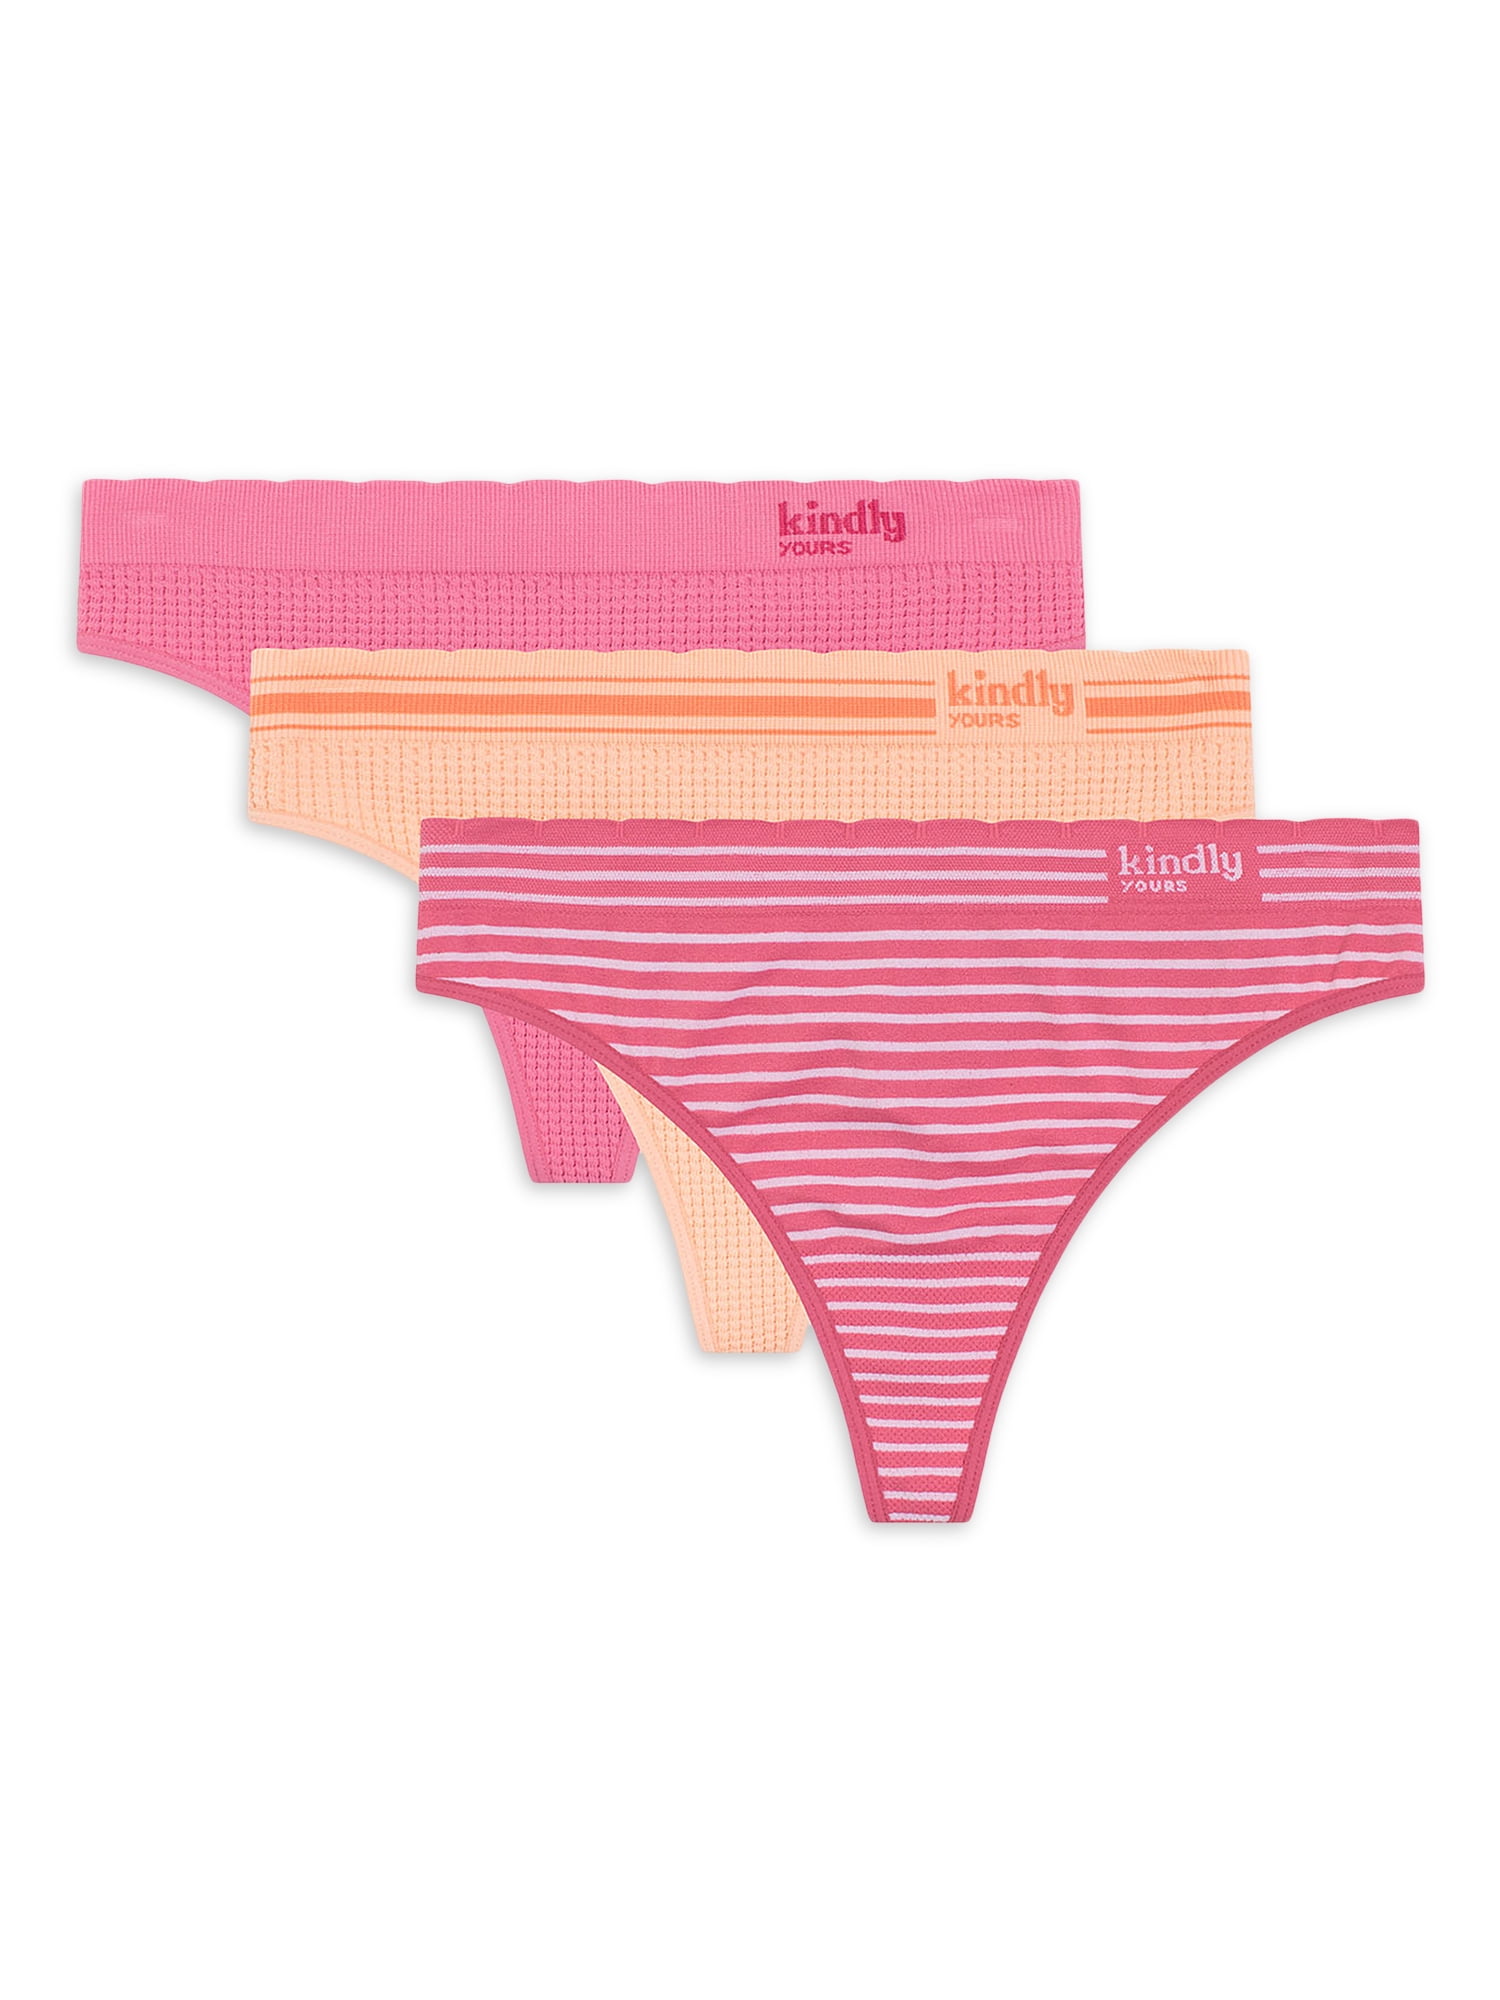 Kindly Yours Sustainable Seamless Thong Panties, (Women's), 3-Pack